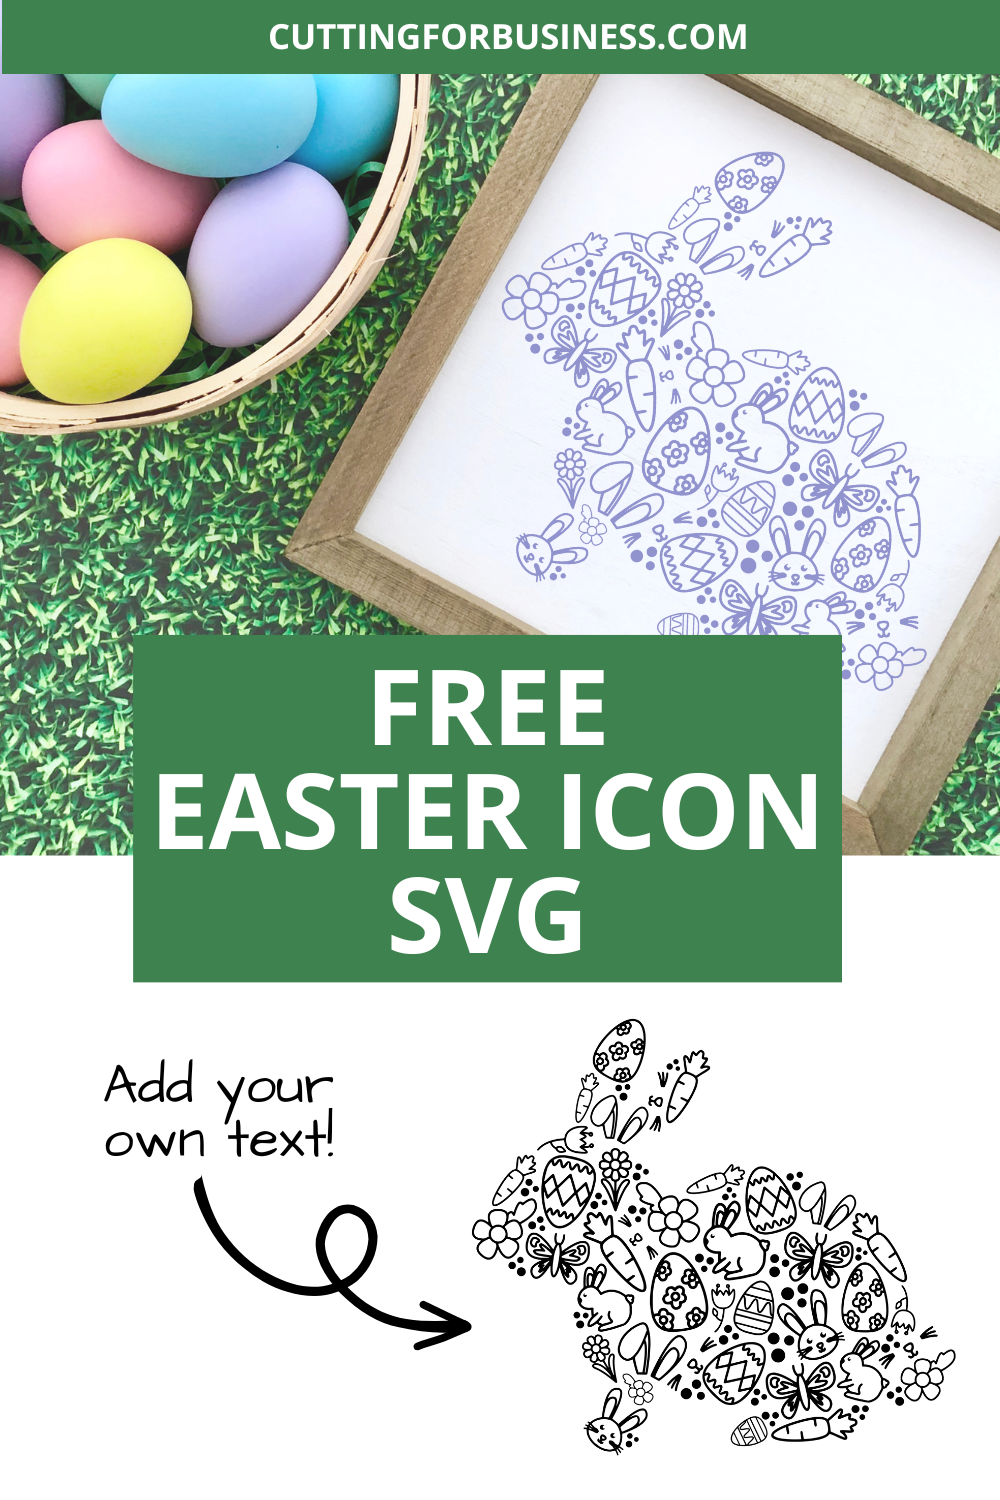 Free Easter SVG Cut File - Bunny Icons - cuttingforbusiness.com